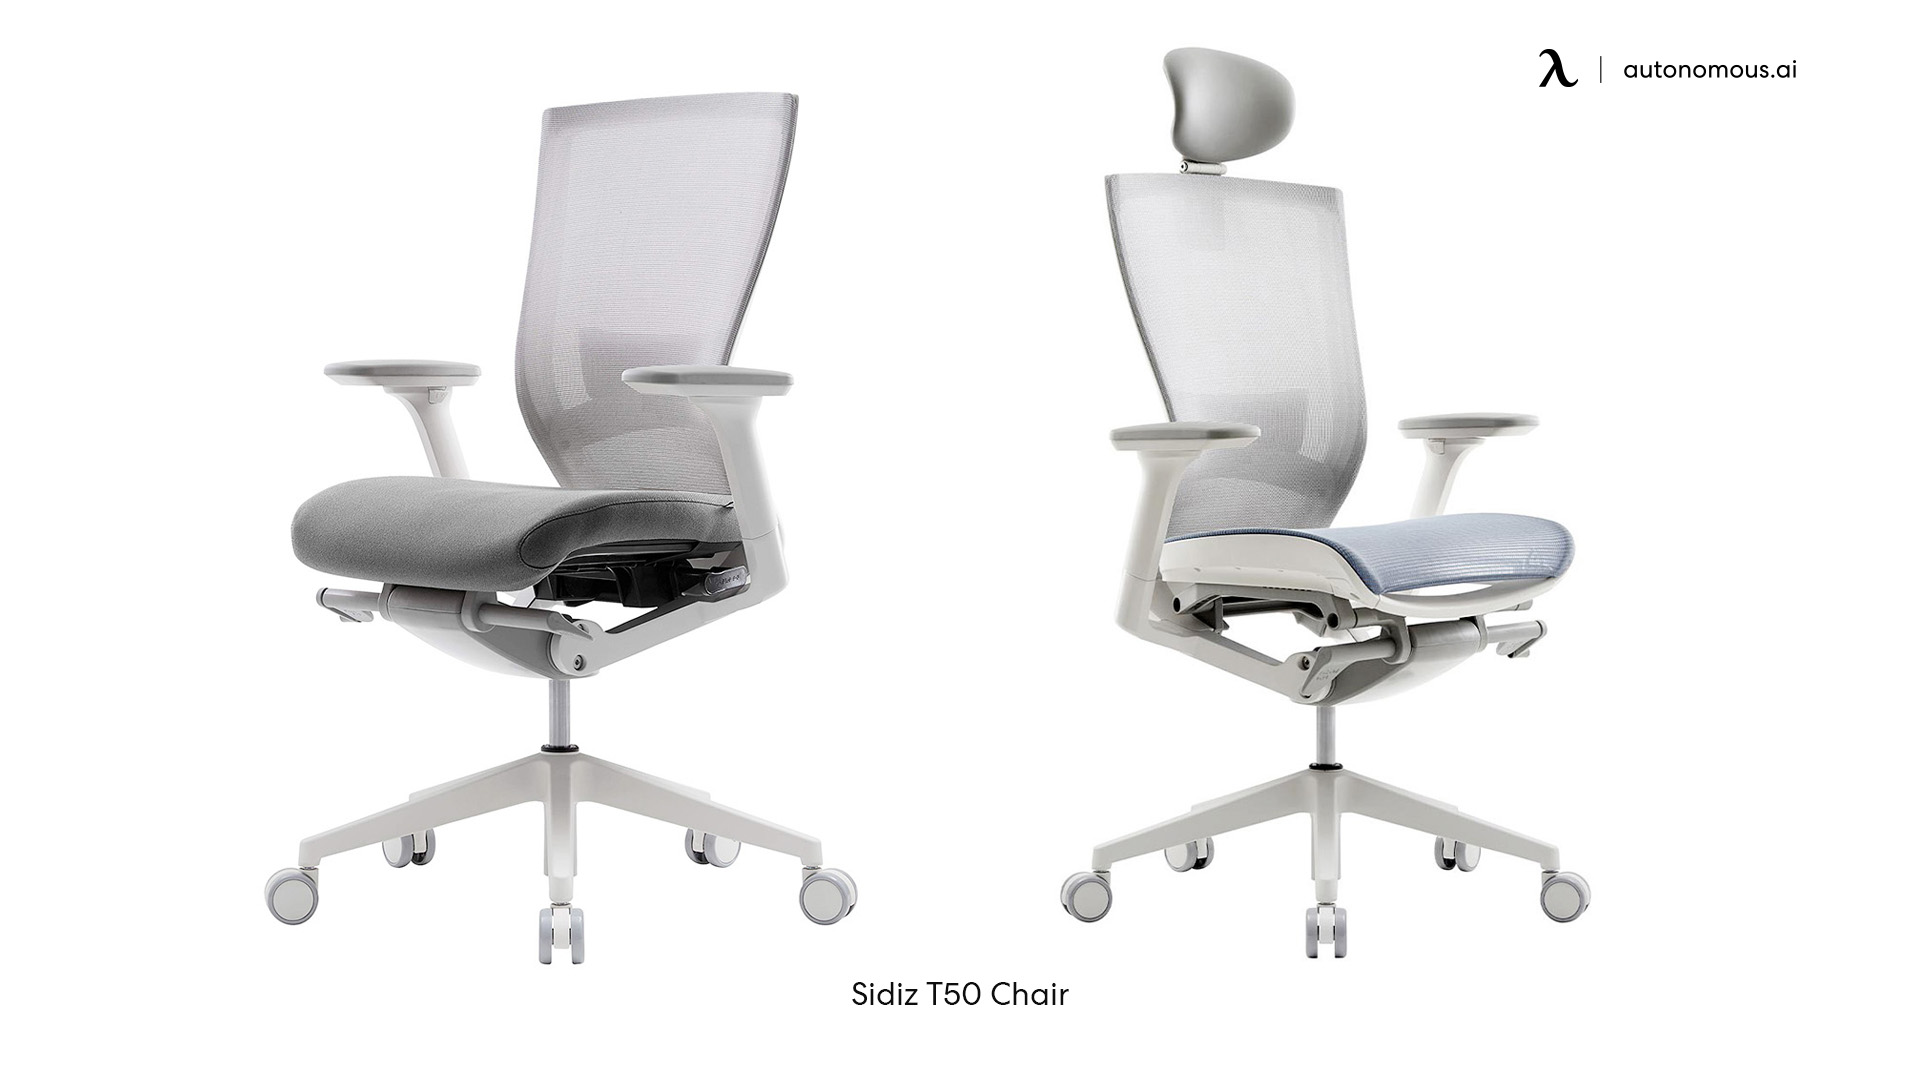 Sidiz T50 office chair with back support